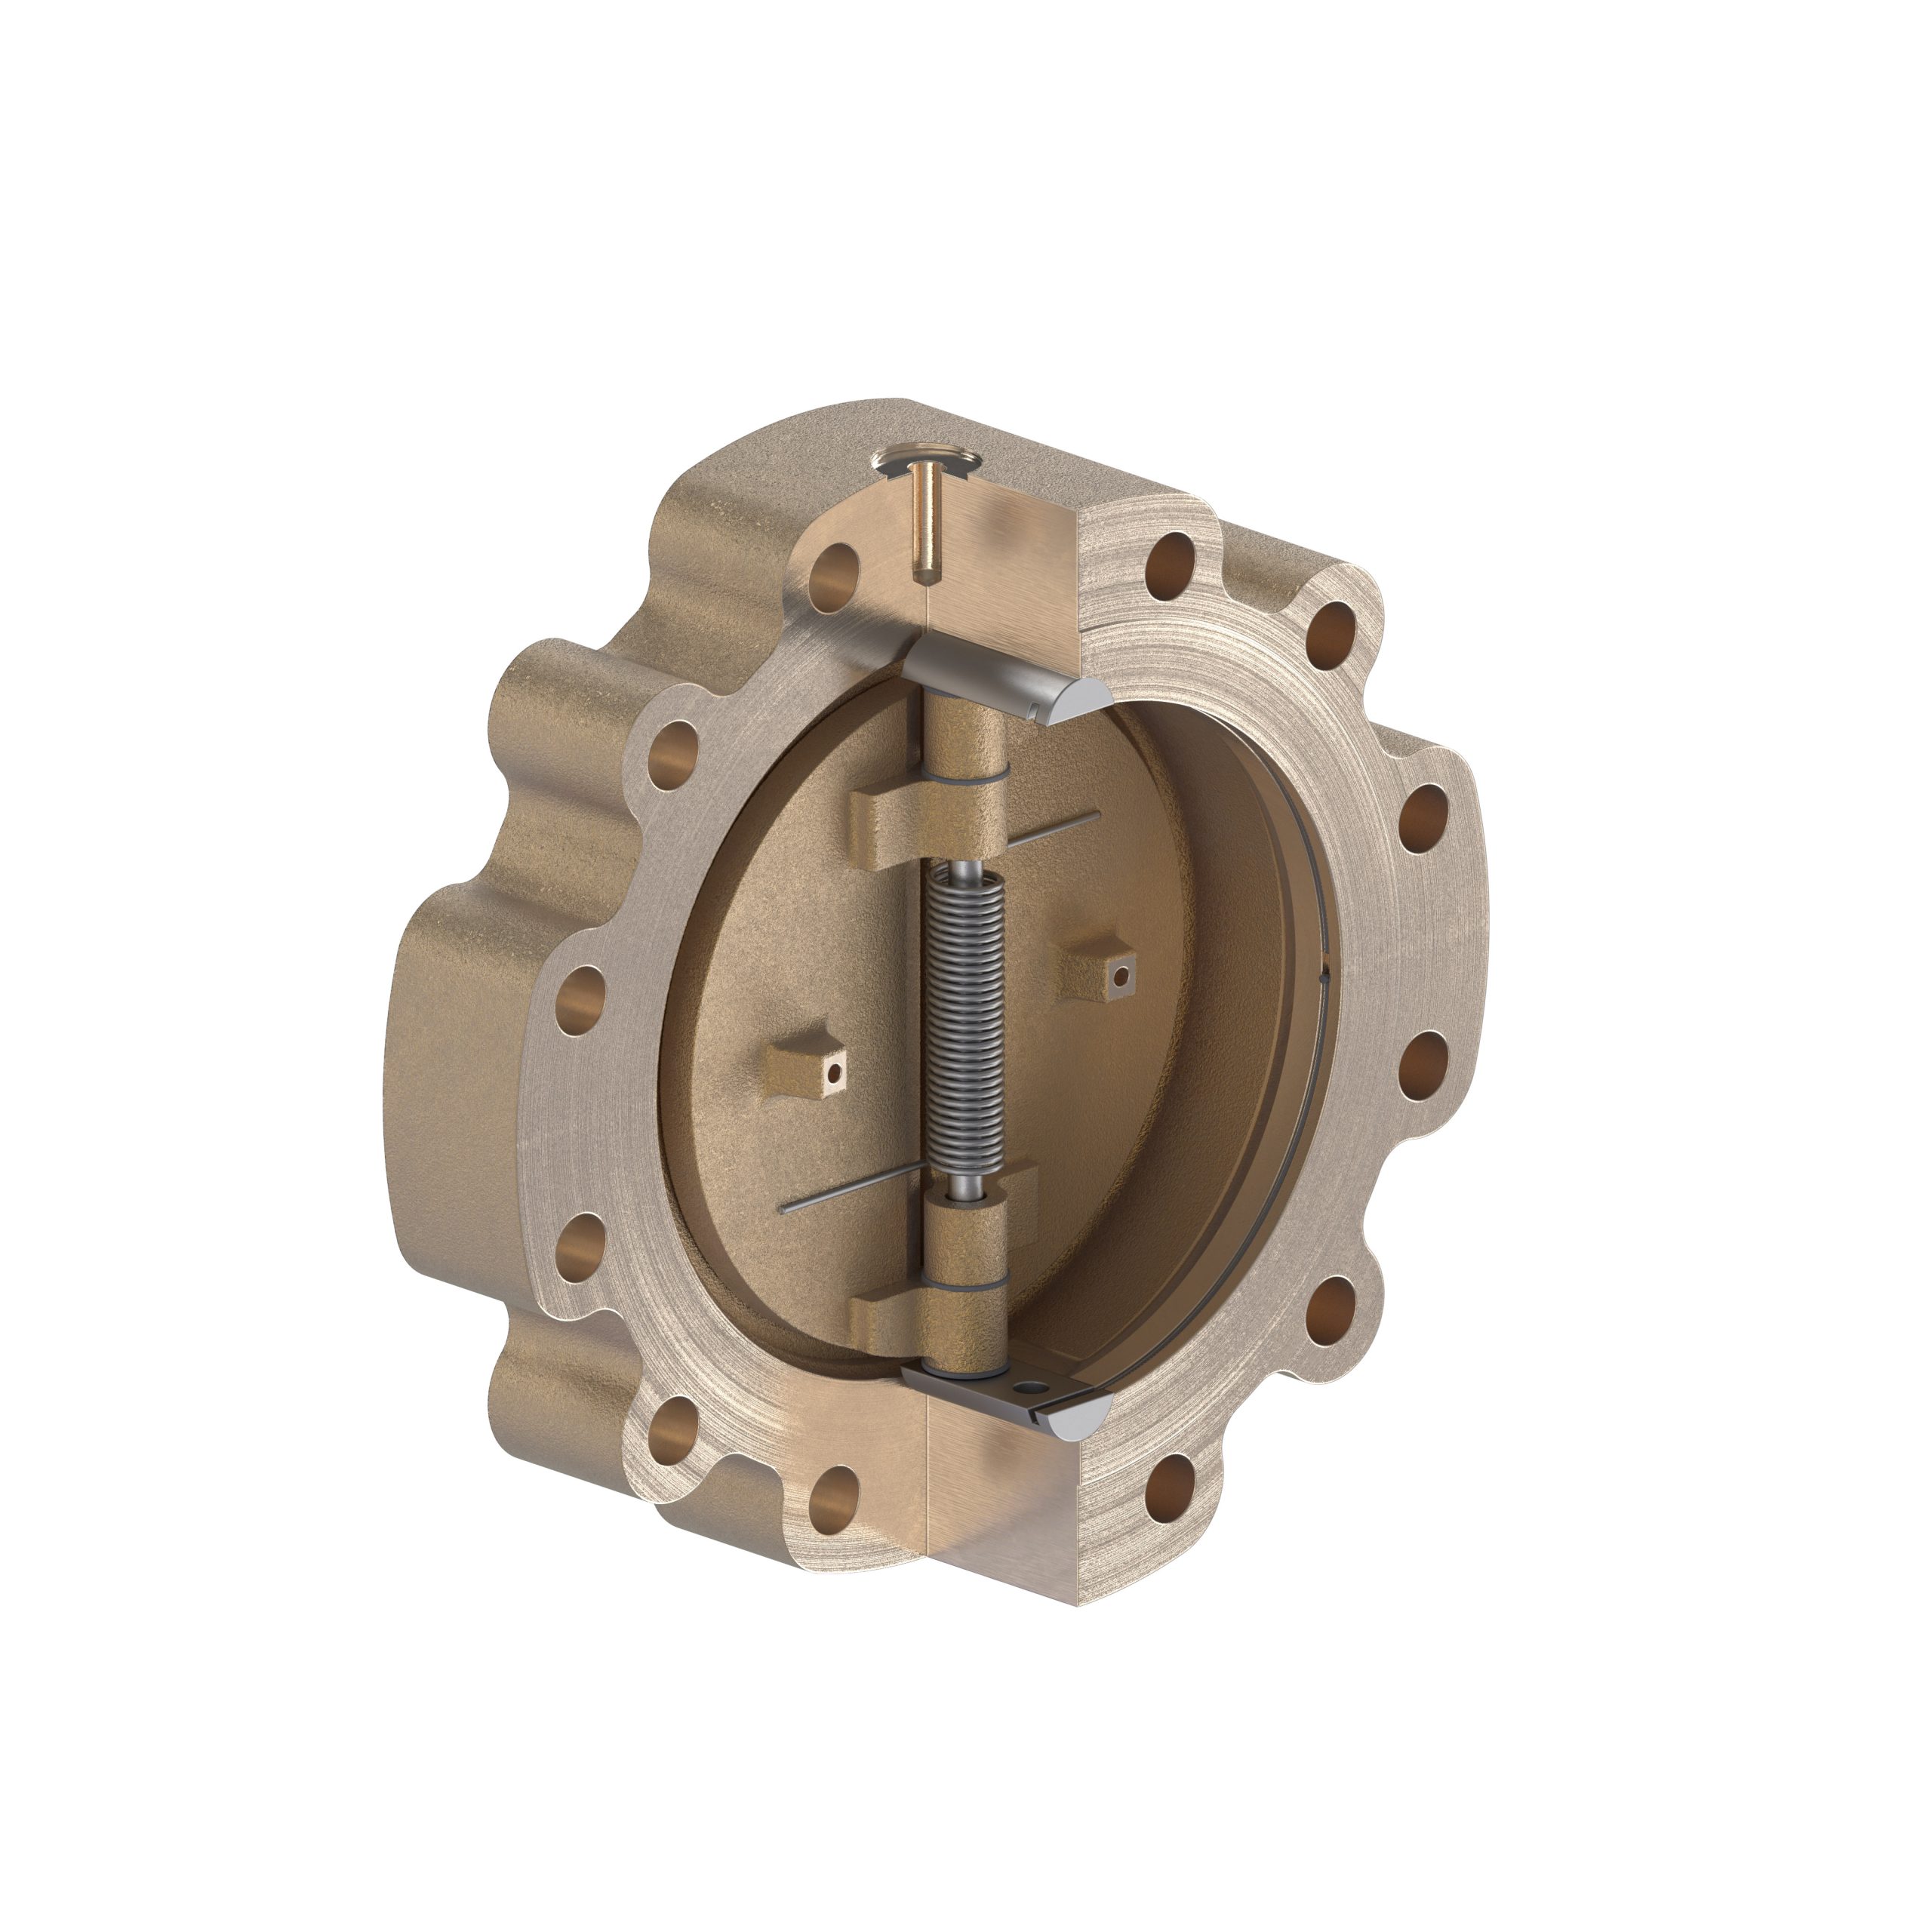 Shipham Valves WC02 Dual Check Plate Valve with lugged body style